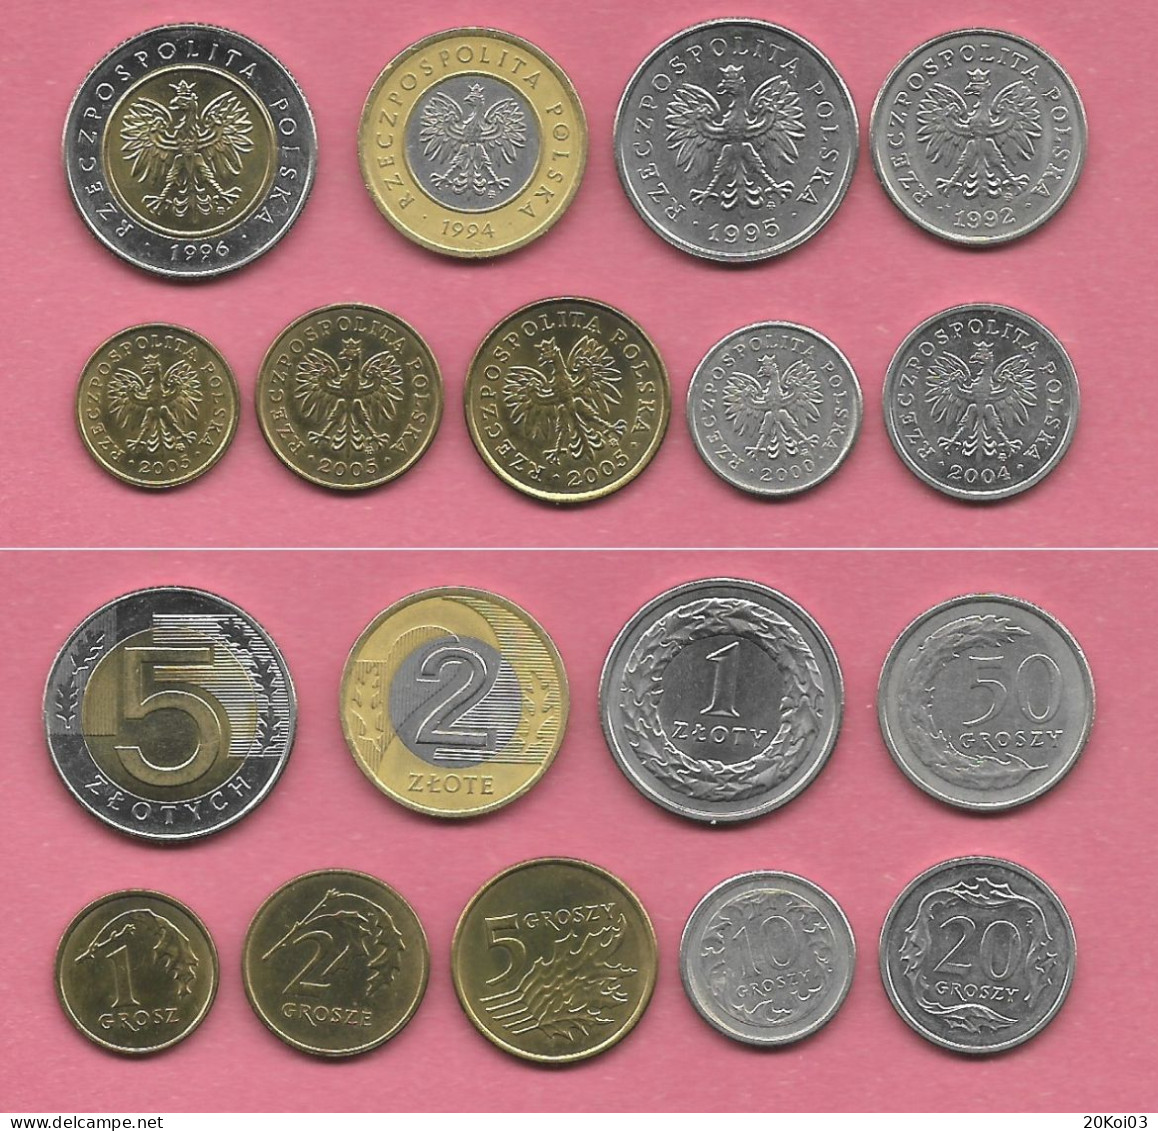 Poland Set Of 9 Coins 1992-2005 (1+2+5+10+20+50 Groszy+1+2+5 Zlotych)_toutes Les Pièces Utilisées, All Coin Used - Polonia